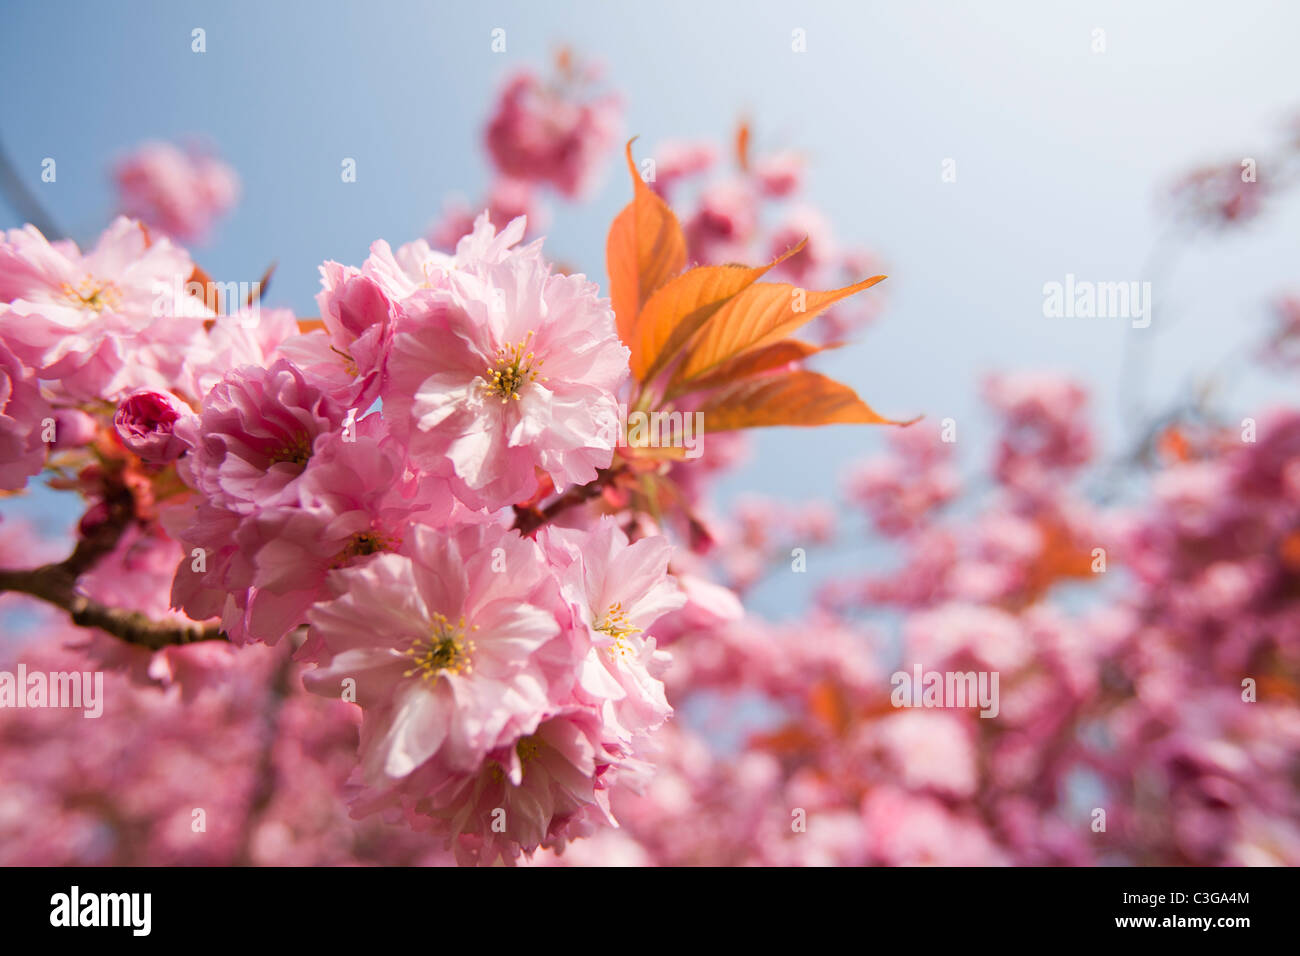 Cherry blossom on an ornamental cherry tree in Spring, Ambleside, Cumbria, UK. Stock Photo